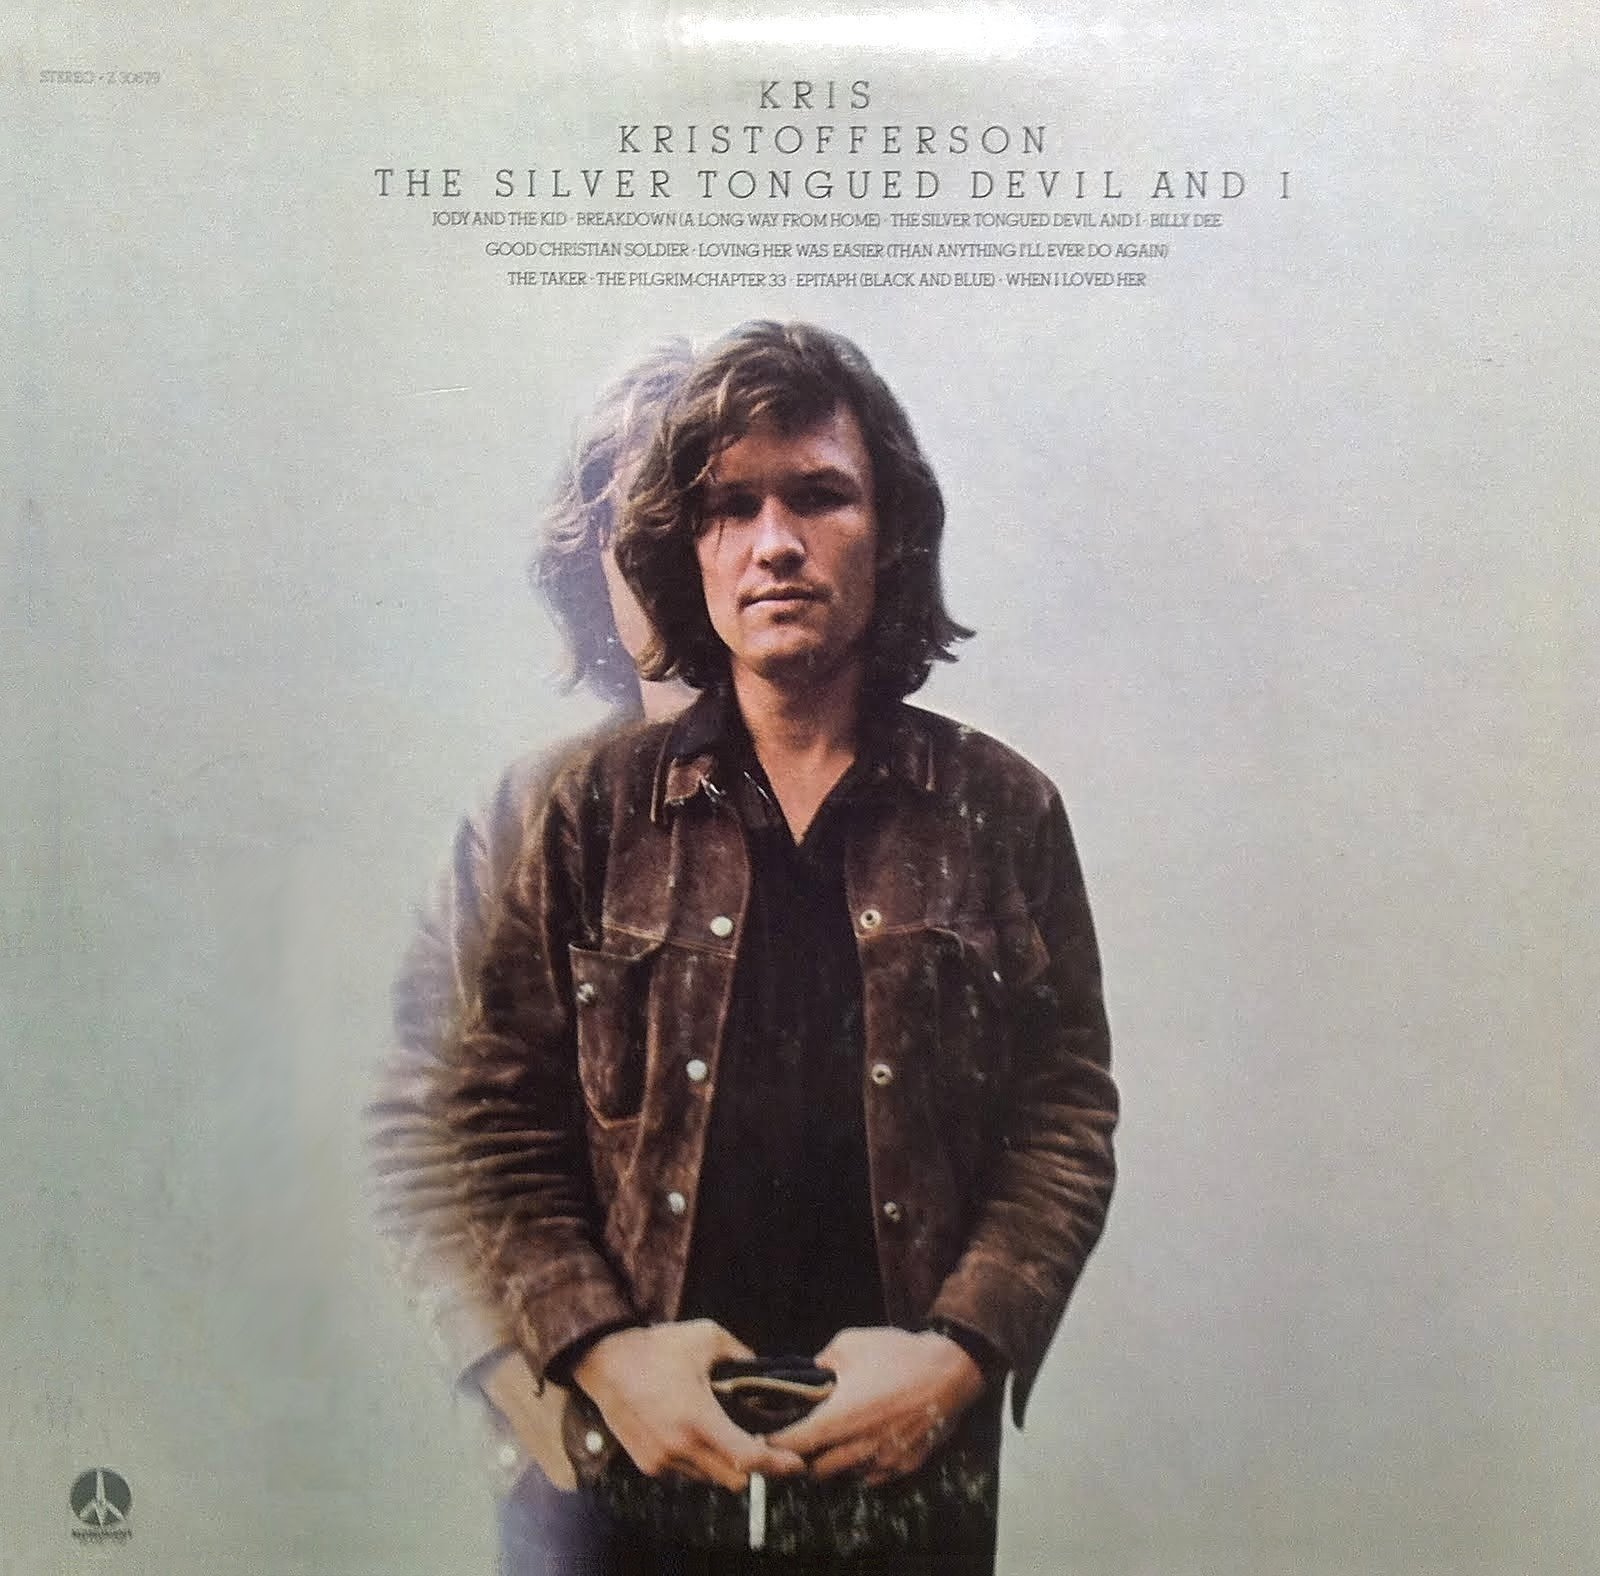 Kris Kristofferson - The Silver Tongued Devil And I (2016) 24bit FLAC Download